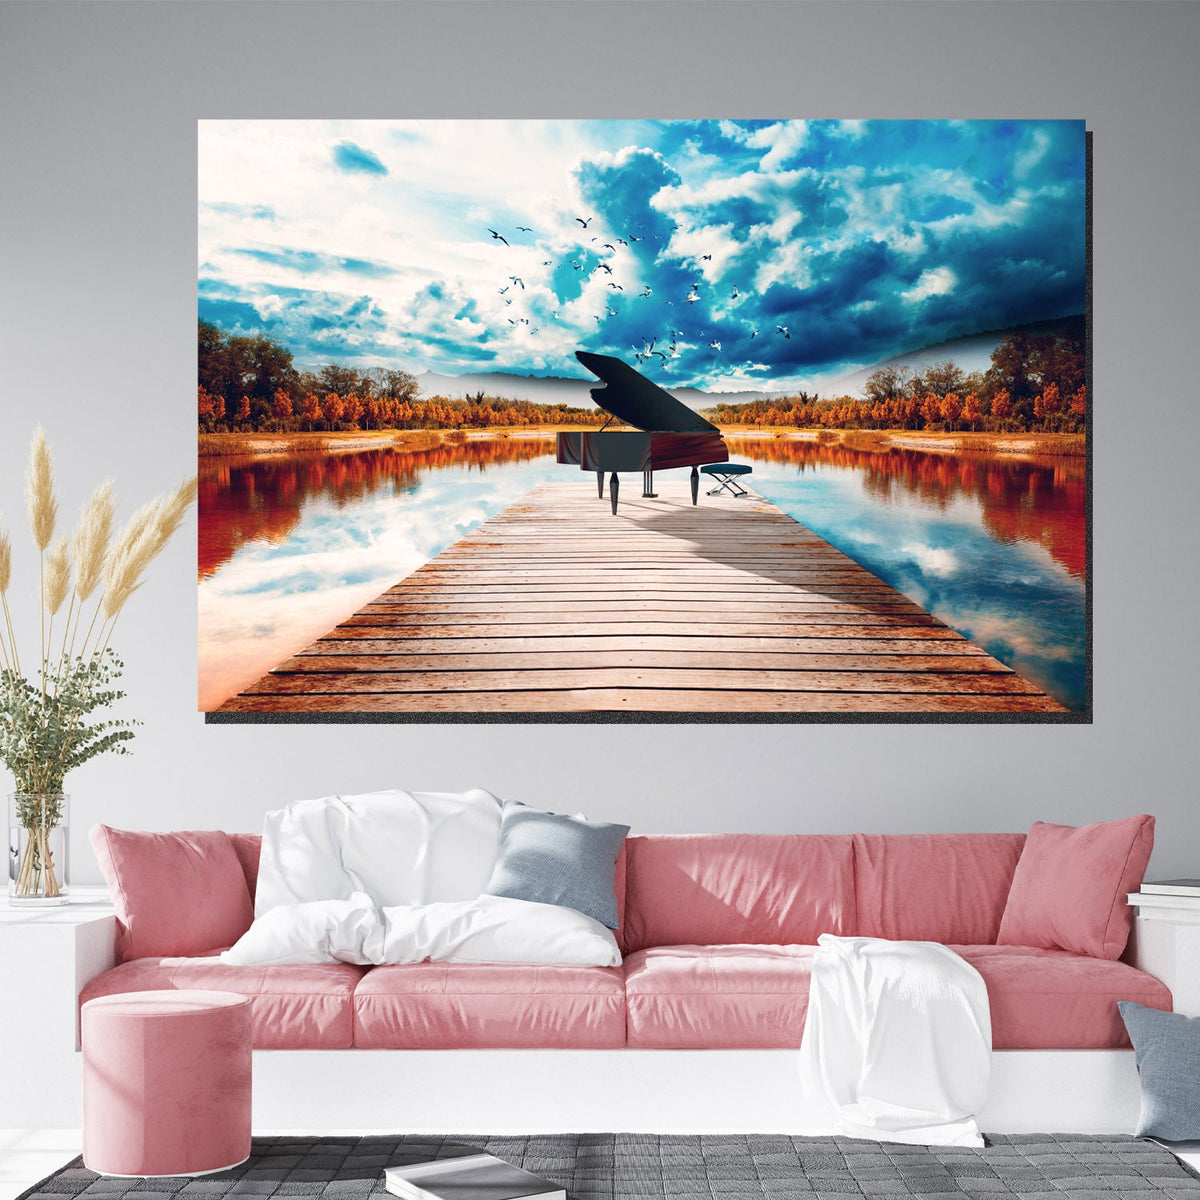 https://cdn.shopify.com/s/files/1/0387/9986/8044/products/PianoonthepierCanvasPrintStretched-2.jpg